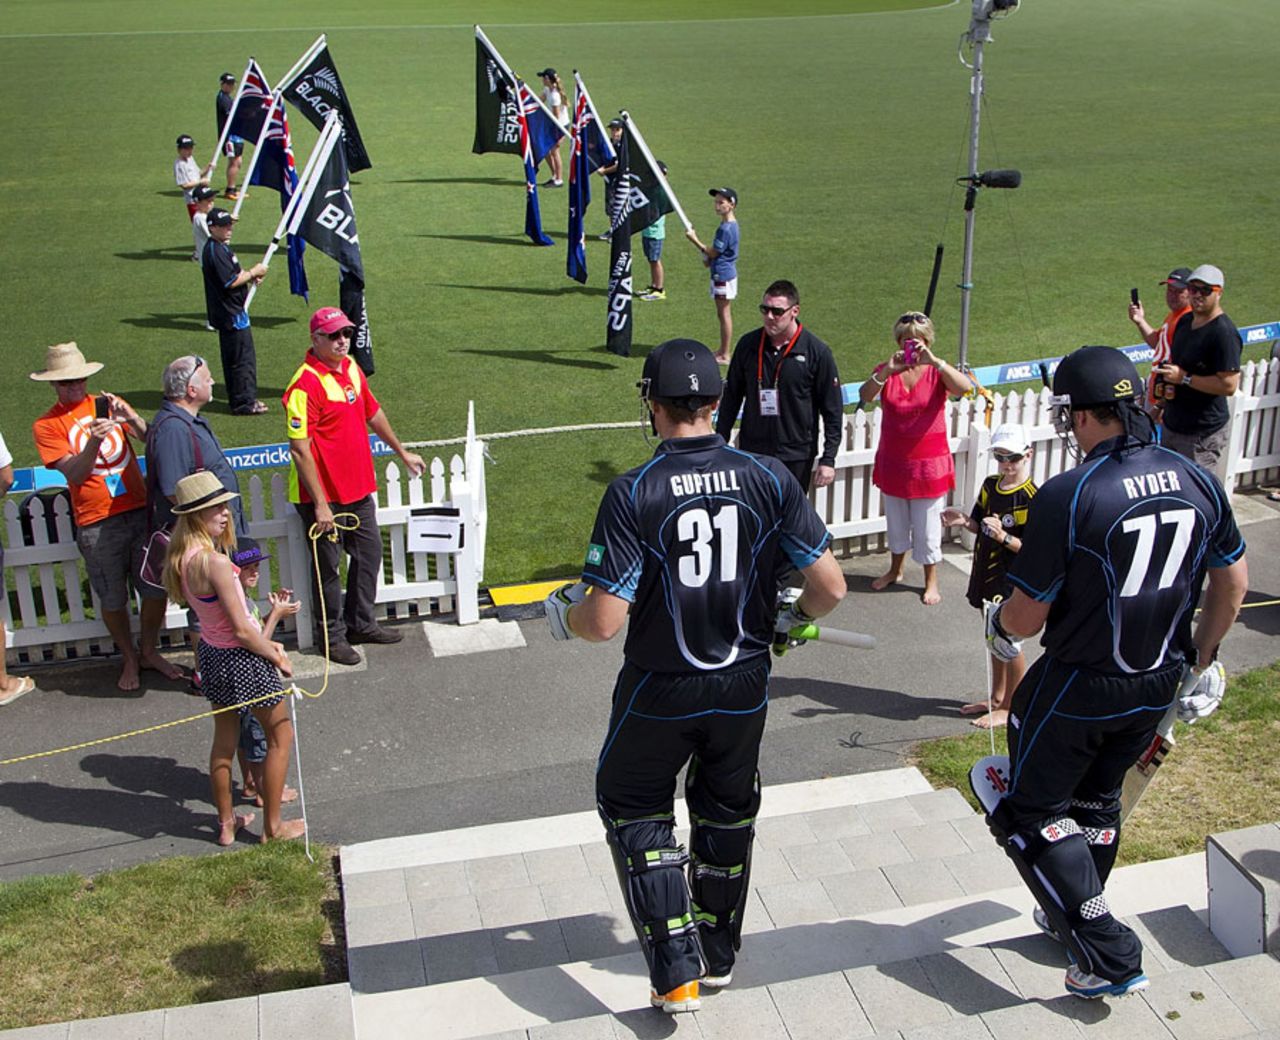 Martin Guptill and Jesse Ryder walk out for the first ball of ODI cricket in Nelson, New Zealand v West Indies, 4th ODI, Nelson, January 4, 2014